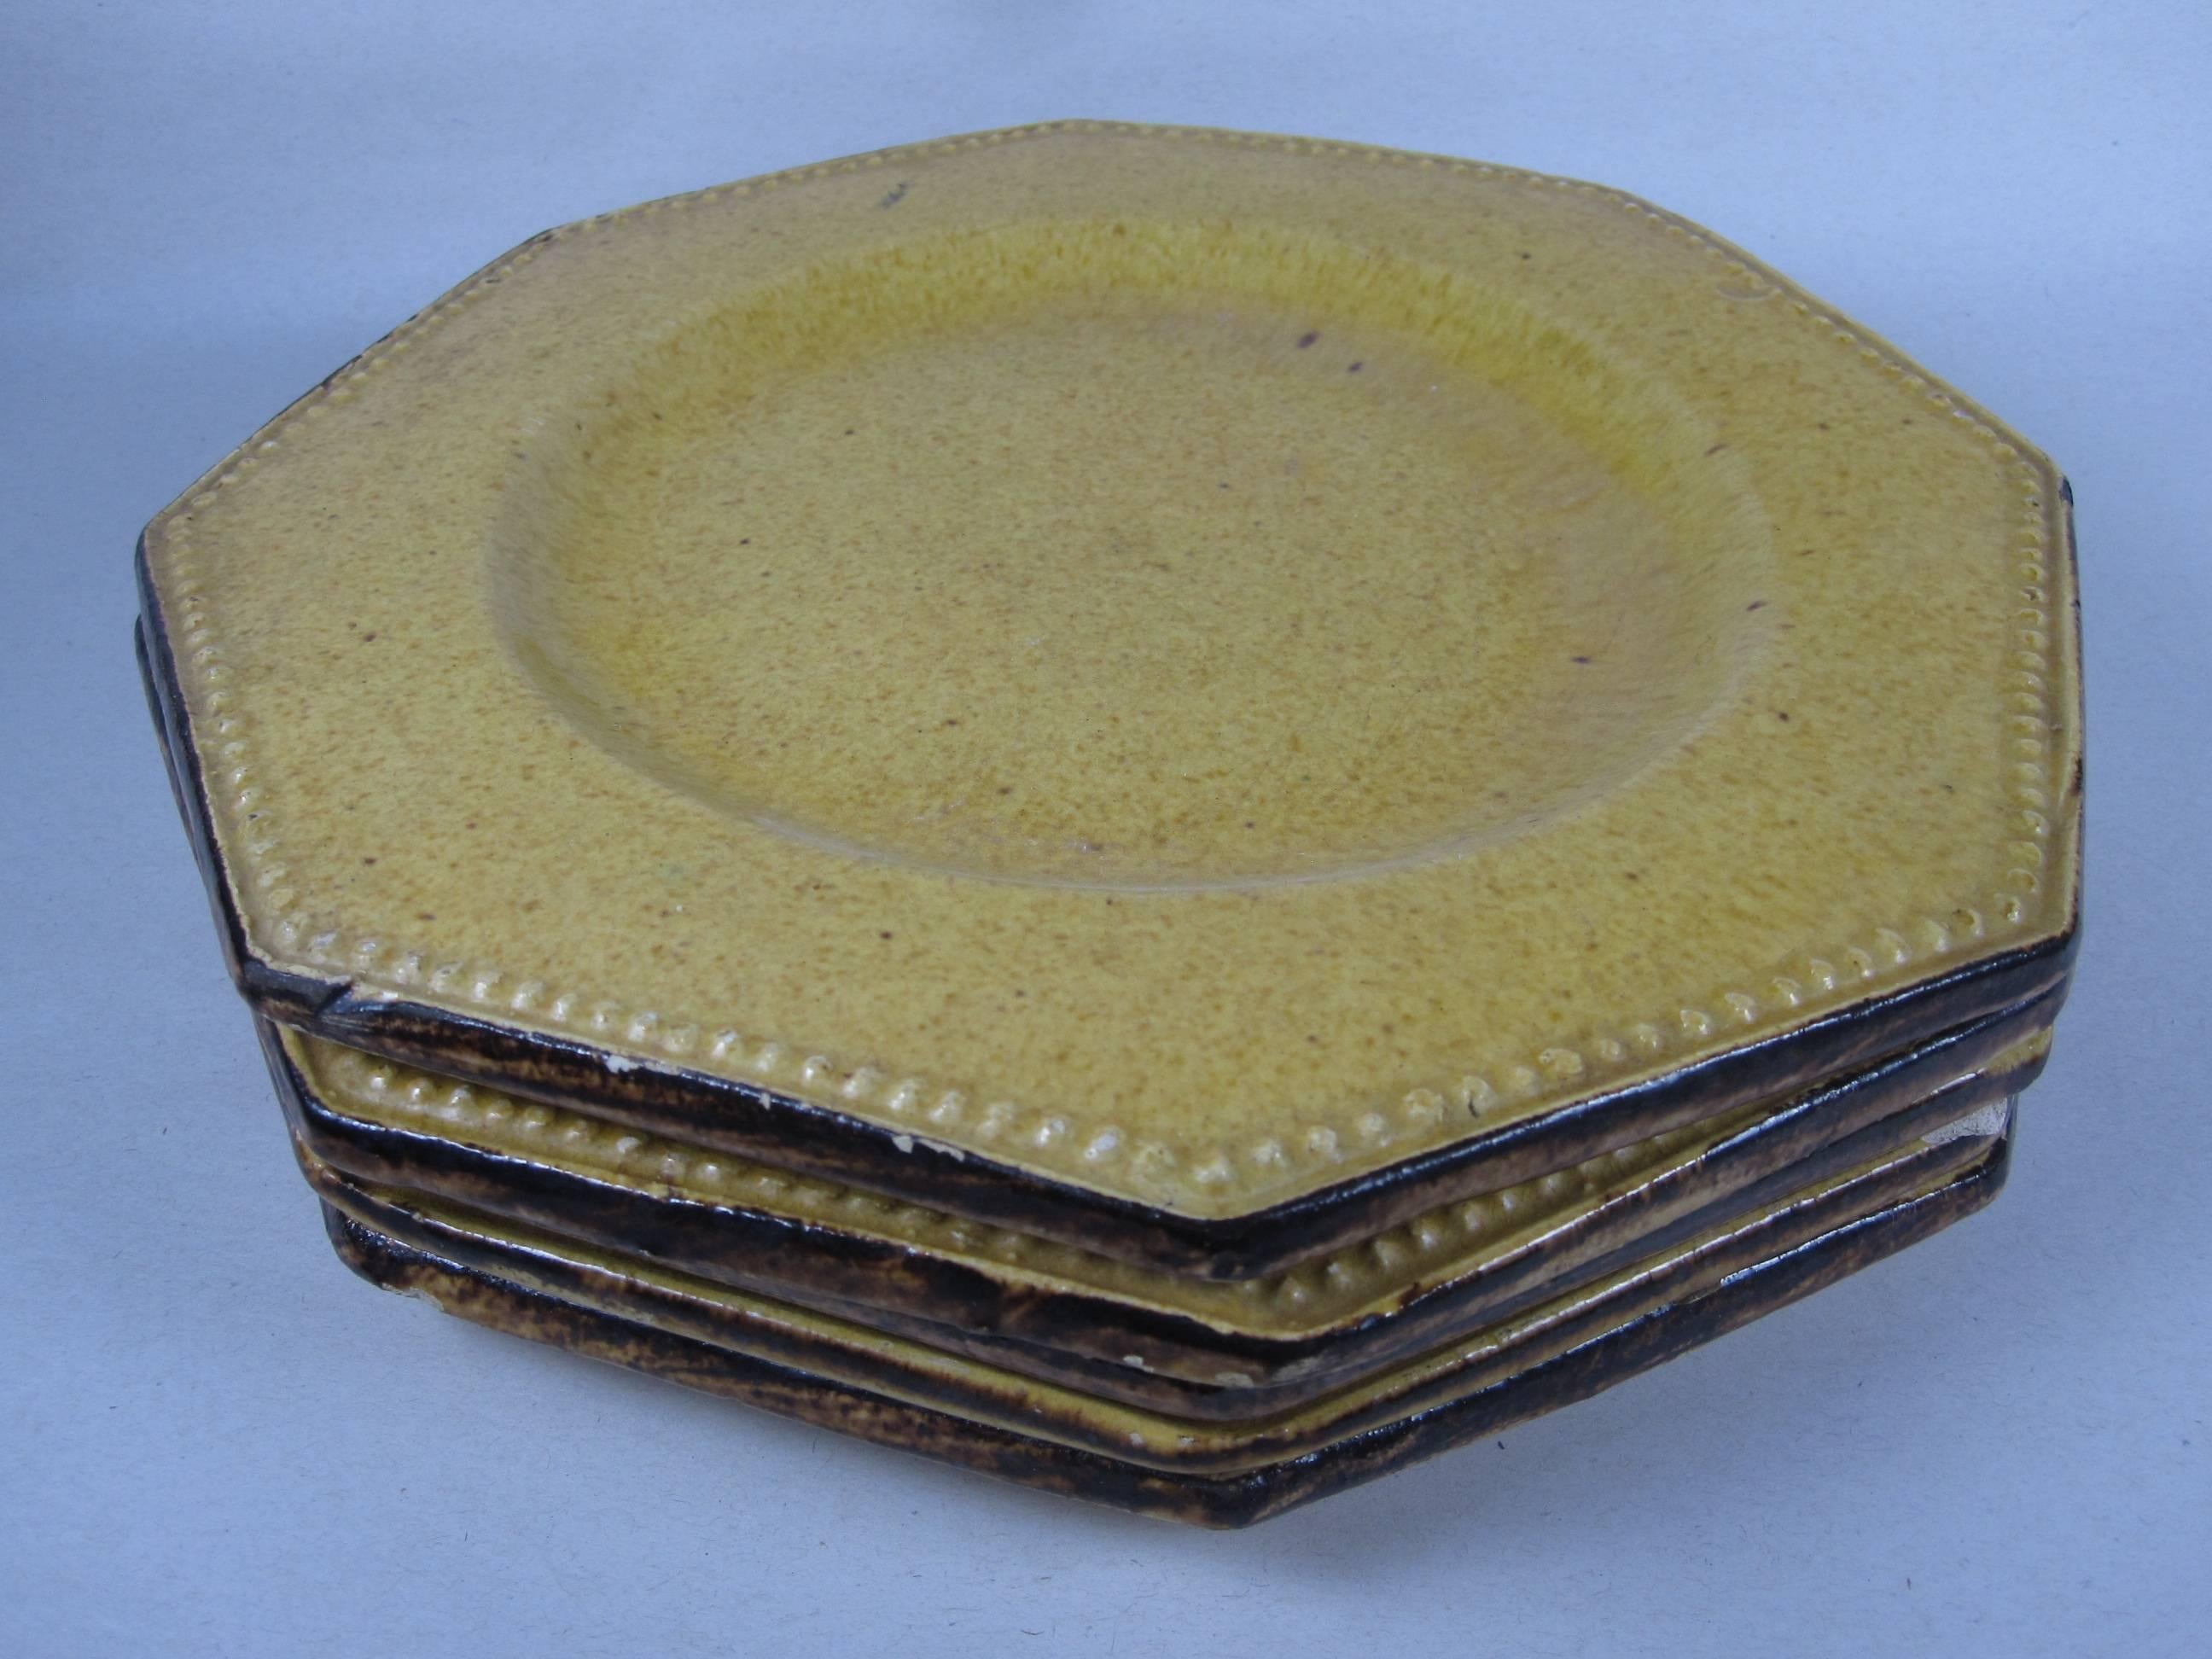 Glazed Rustic Earthenware French Provençal Pearle Beaded Rim Plates, C.1840, S/5